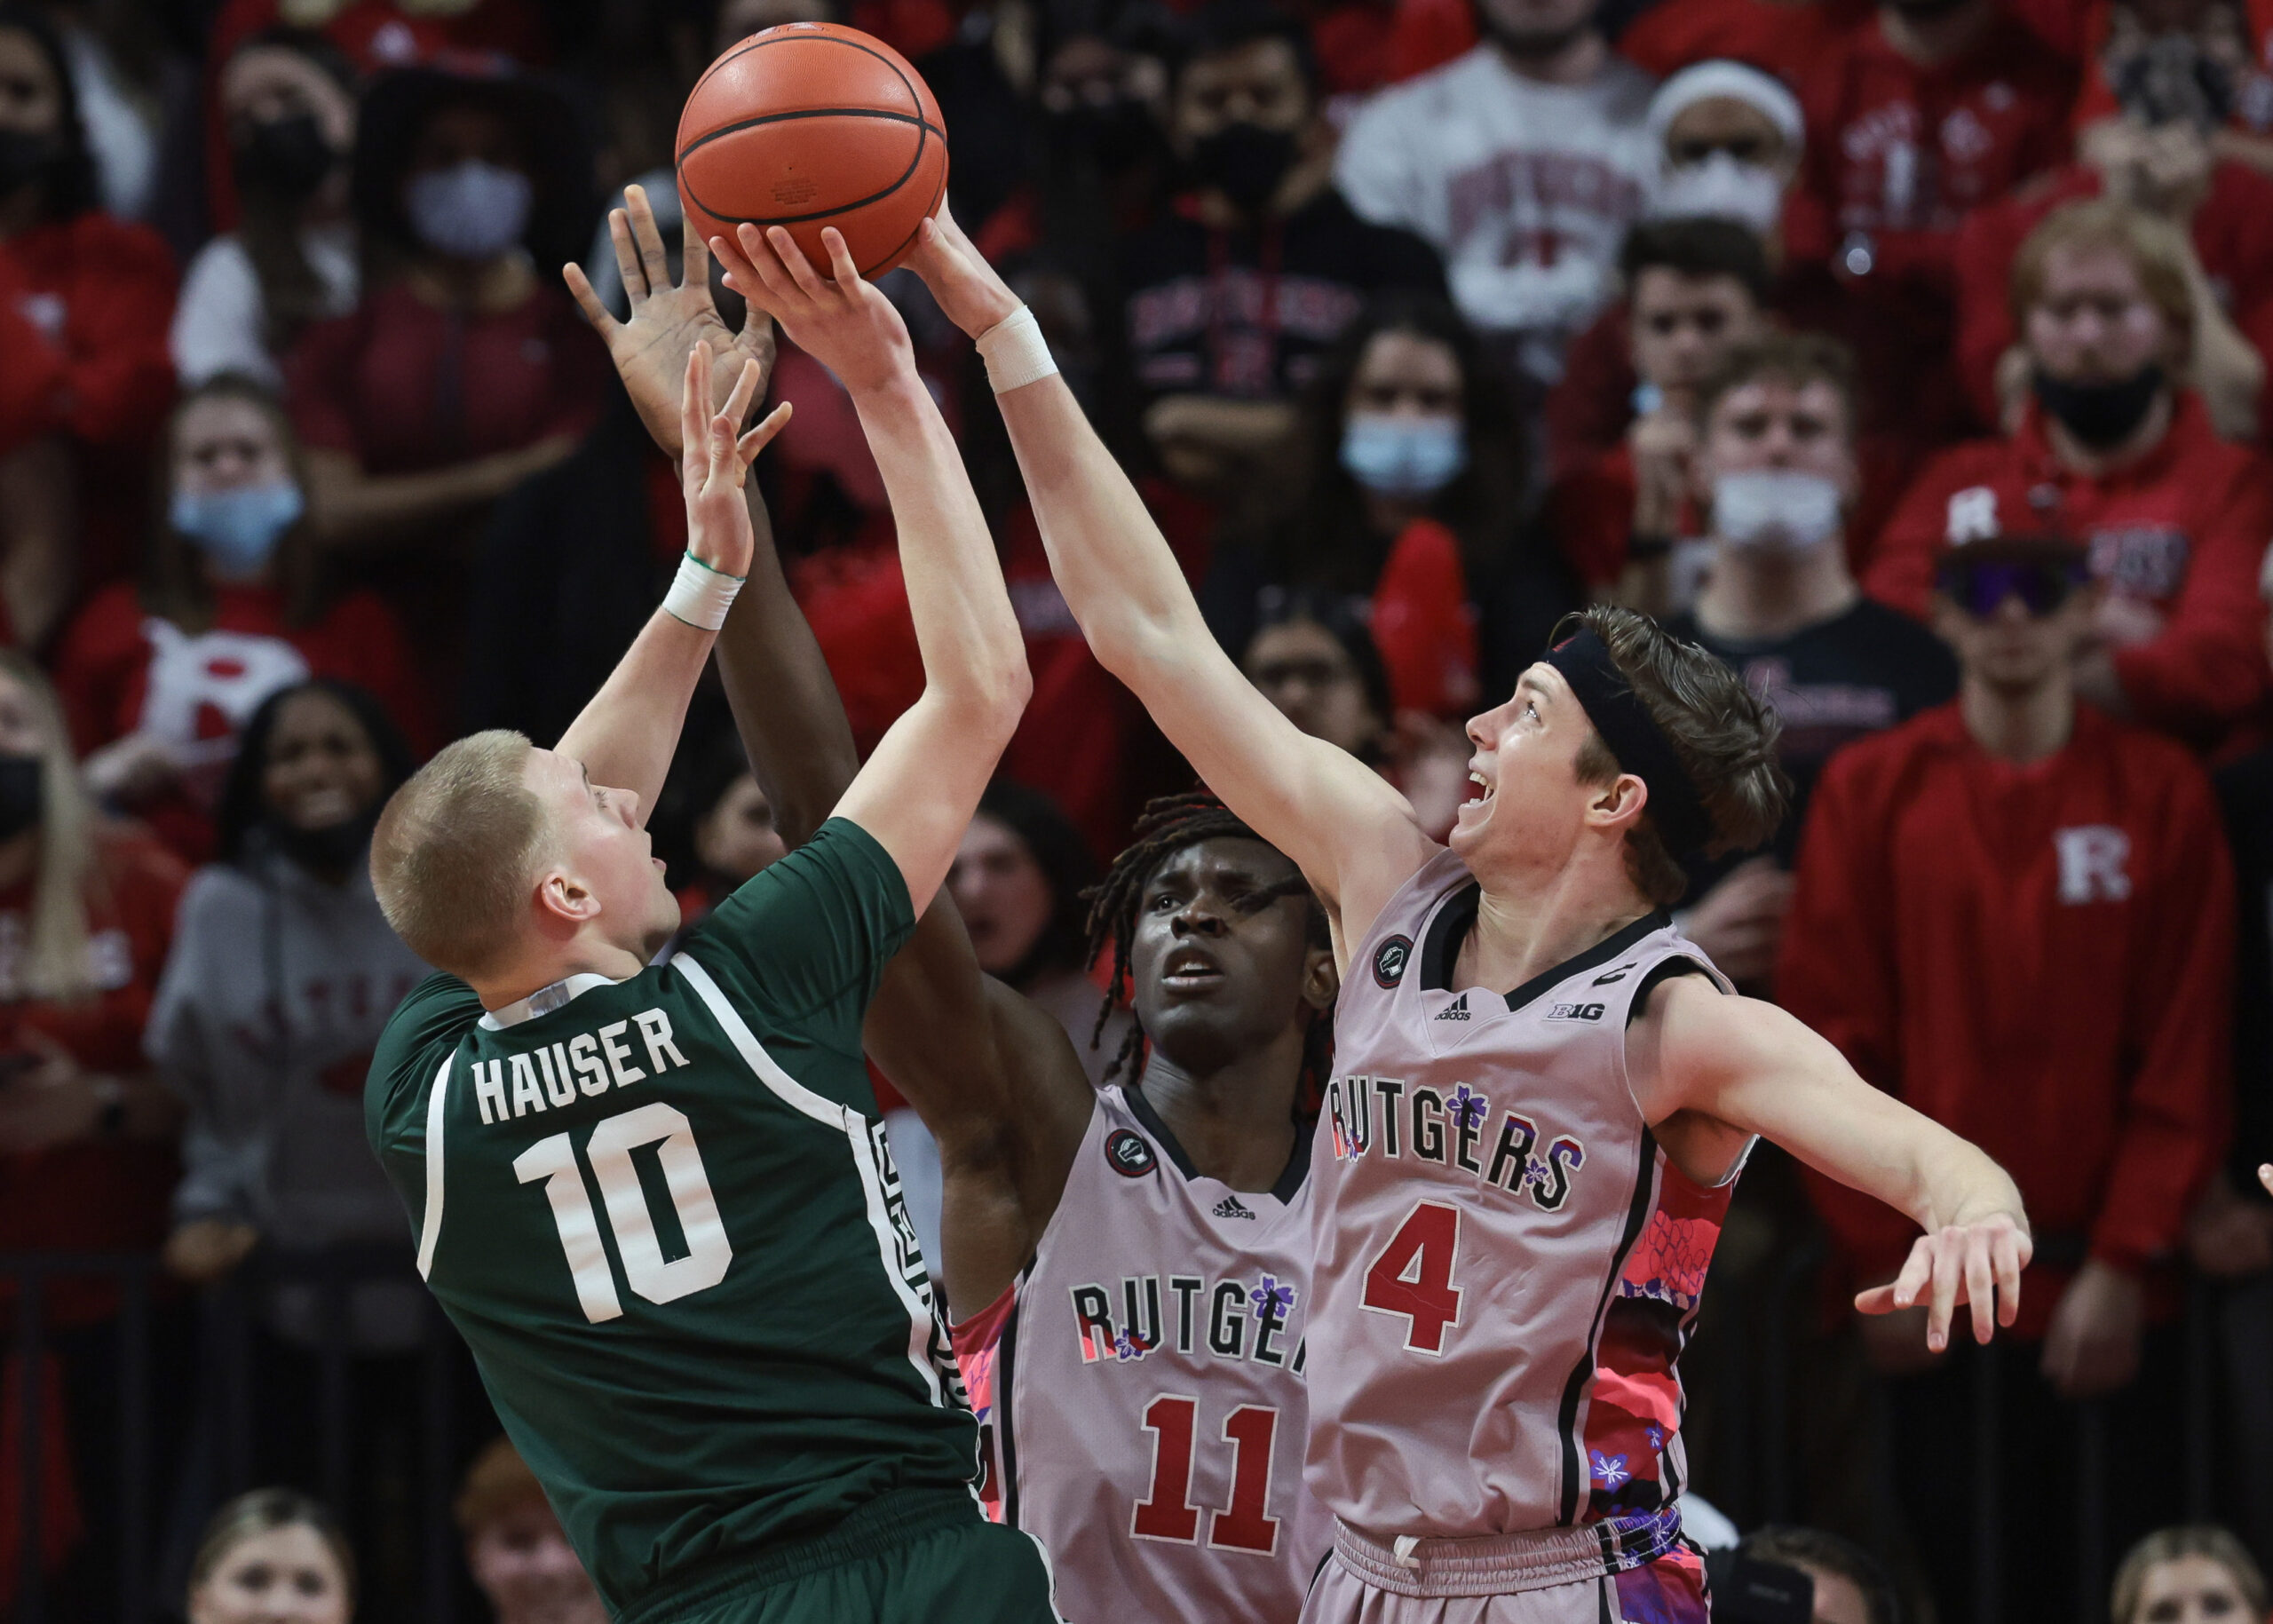 Michigan State basketball player Joey Hauser gets his shot blocked in a game against Rutgers